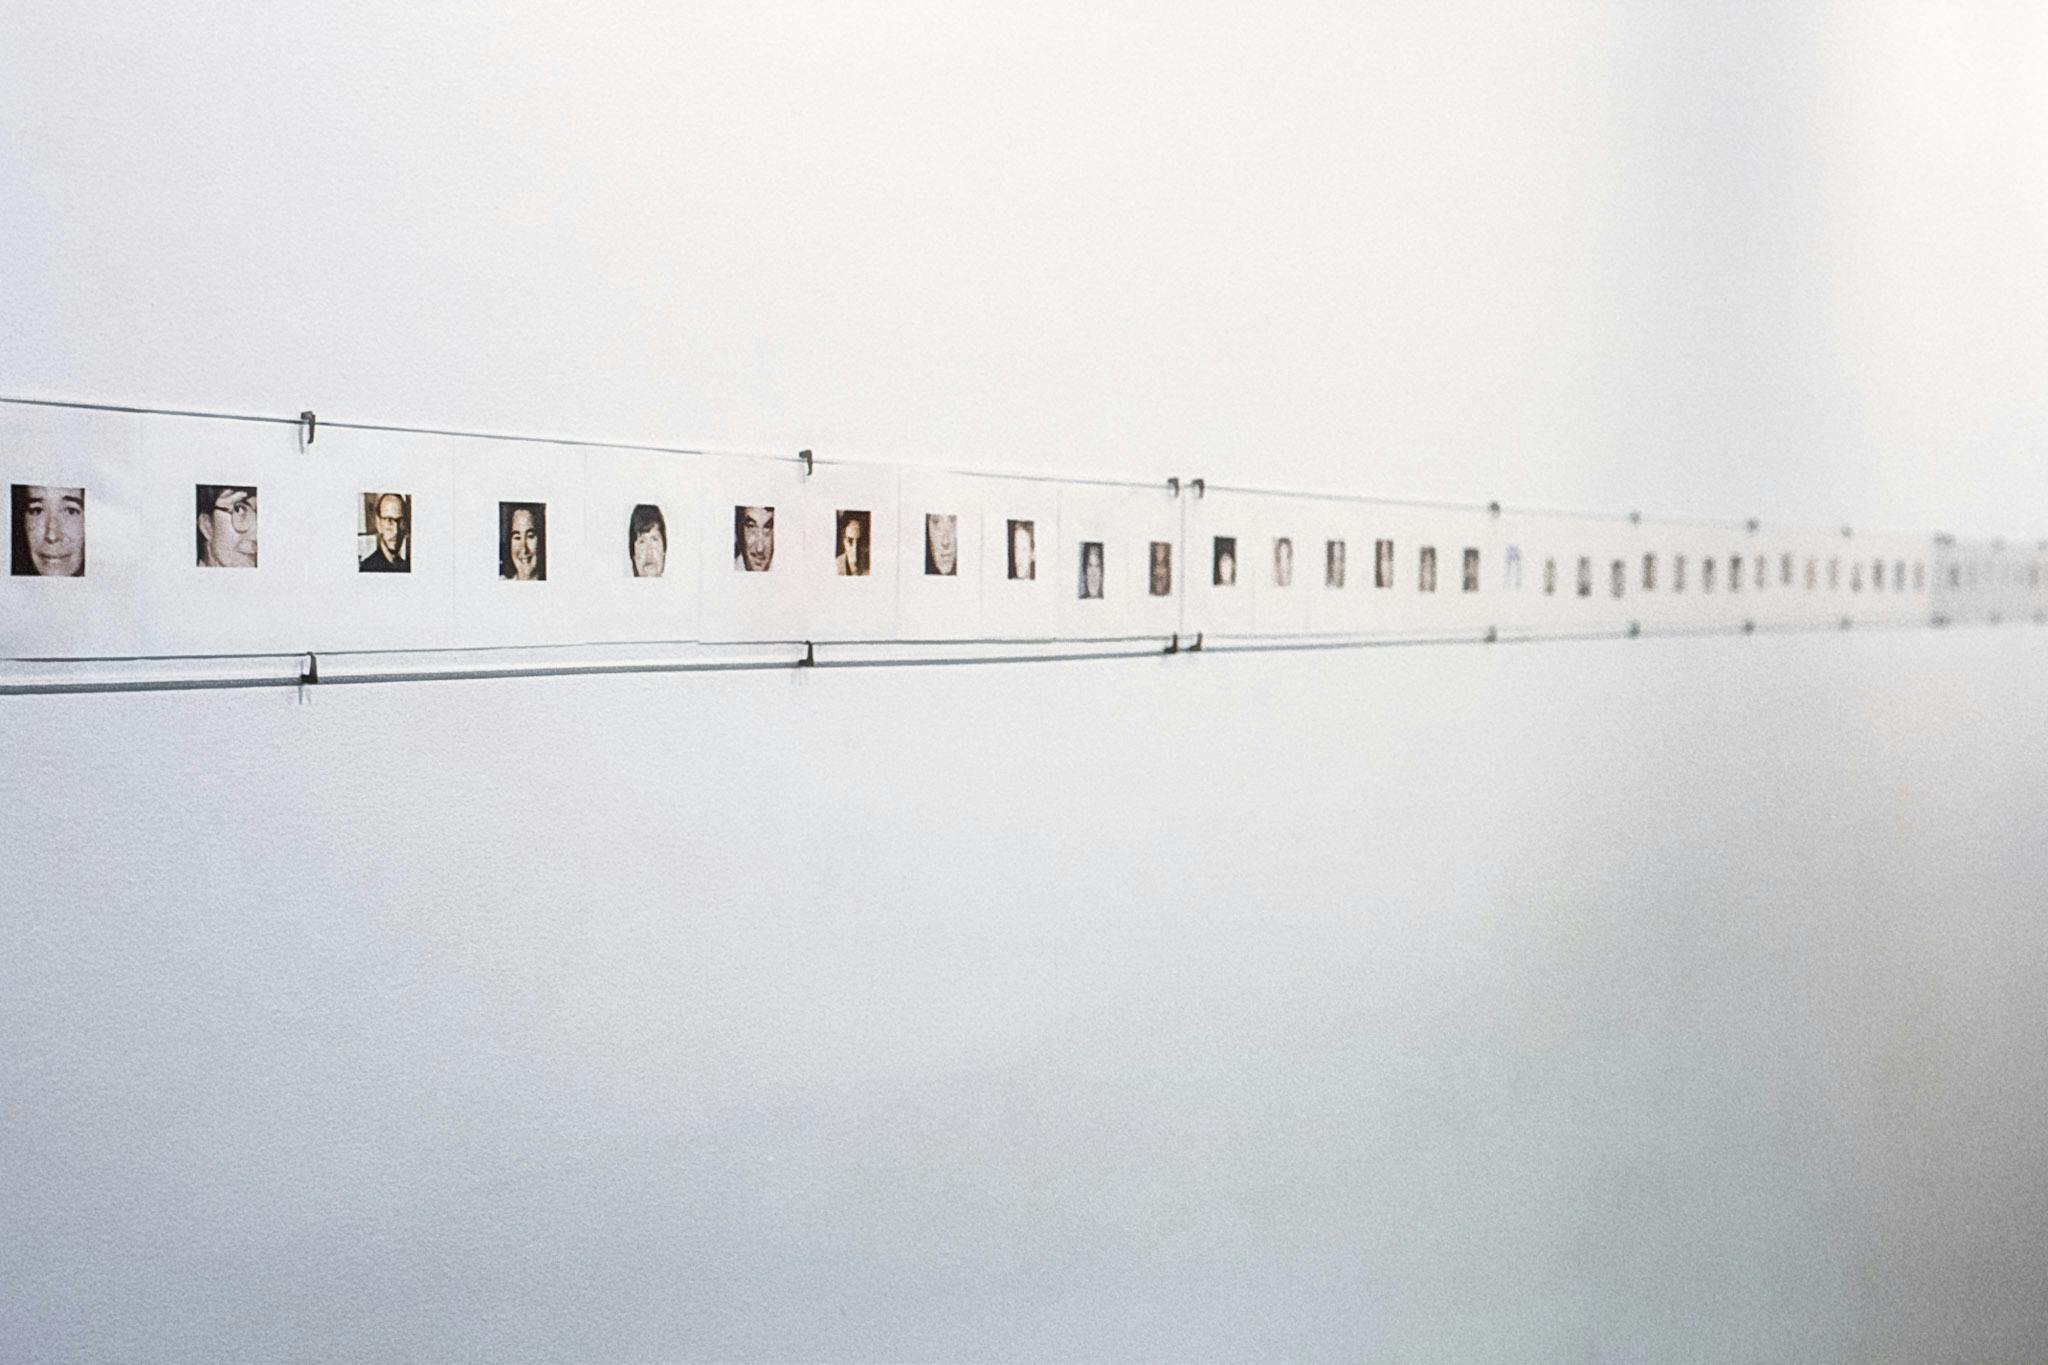 A photo of a photo collage installed in a gallery wall. The photographed faces of different people align horizontally in a long stretched white sheet of paper mounted on a white gallery wall.